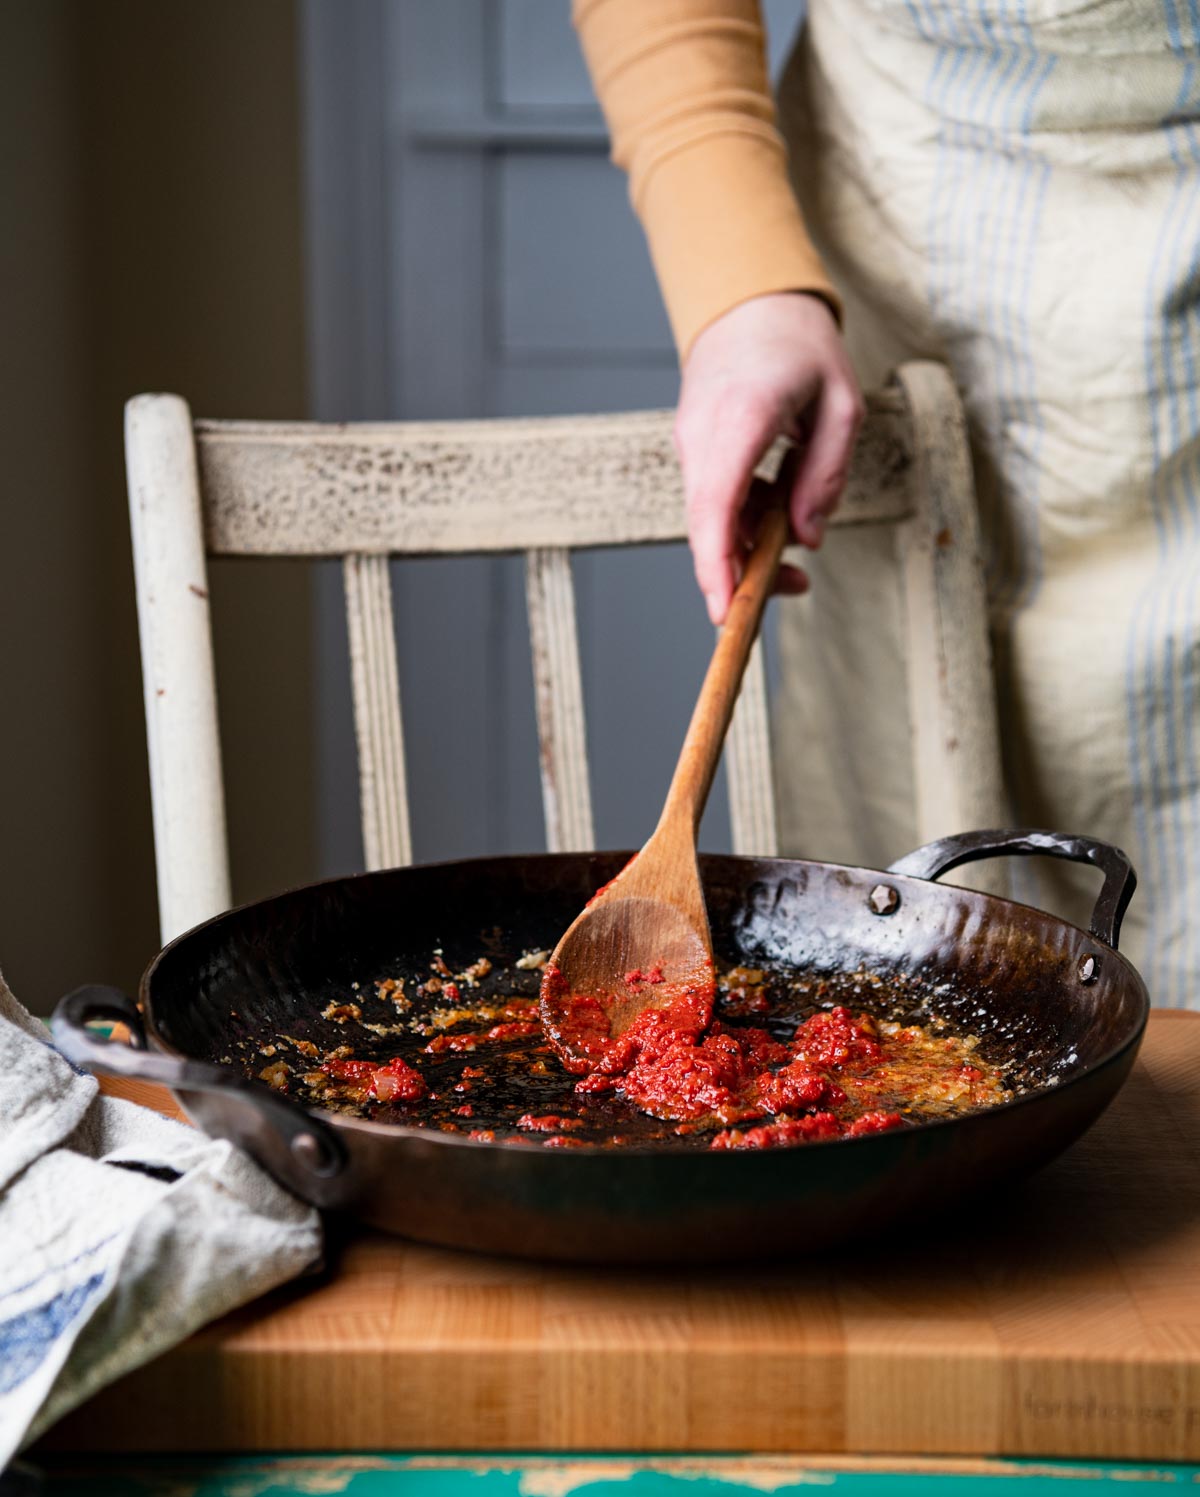 Sauteing tomato paste with shallots and garlic in a skillet.